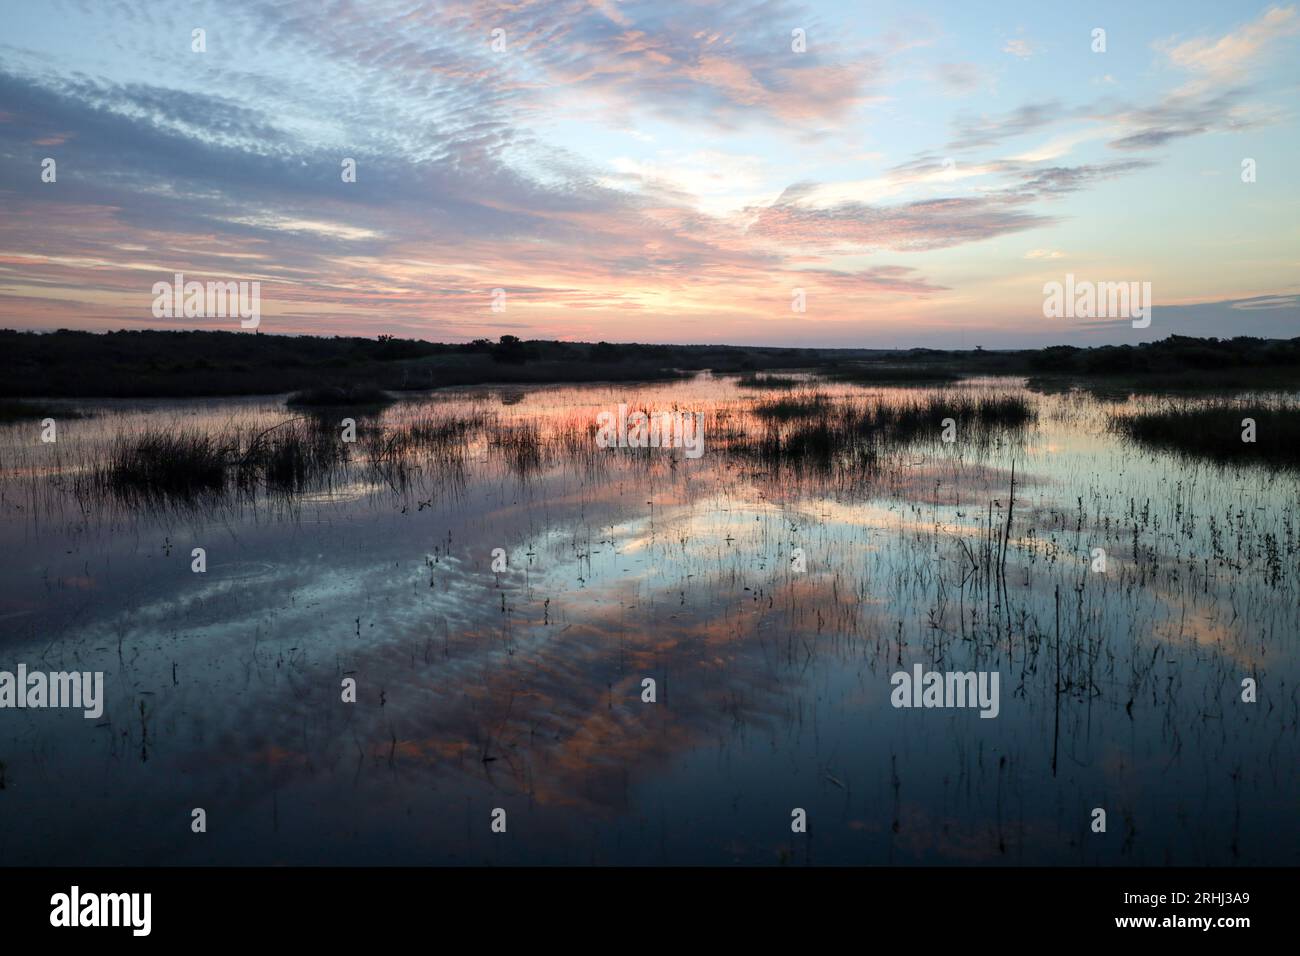 scenic sunrise over a beach marsh landscape at the outer banks north carolina Stock Photo